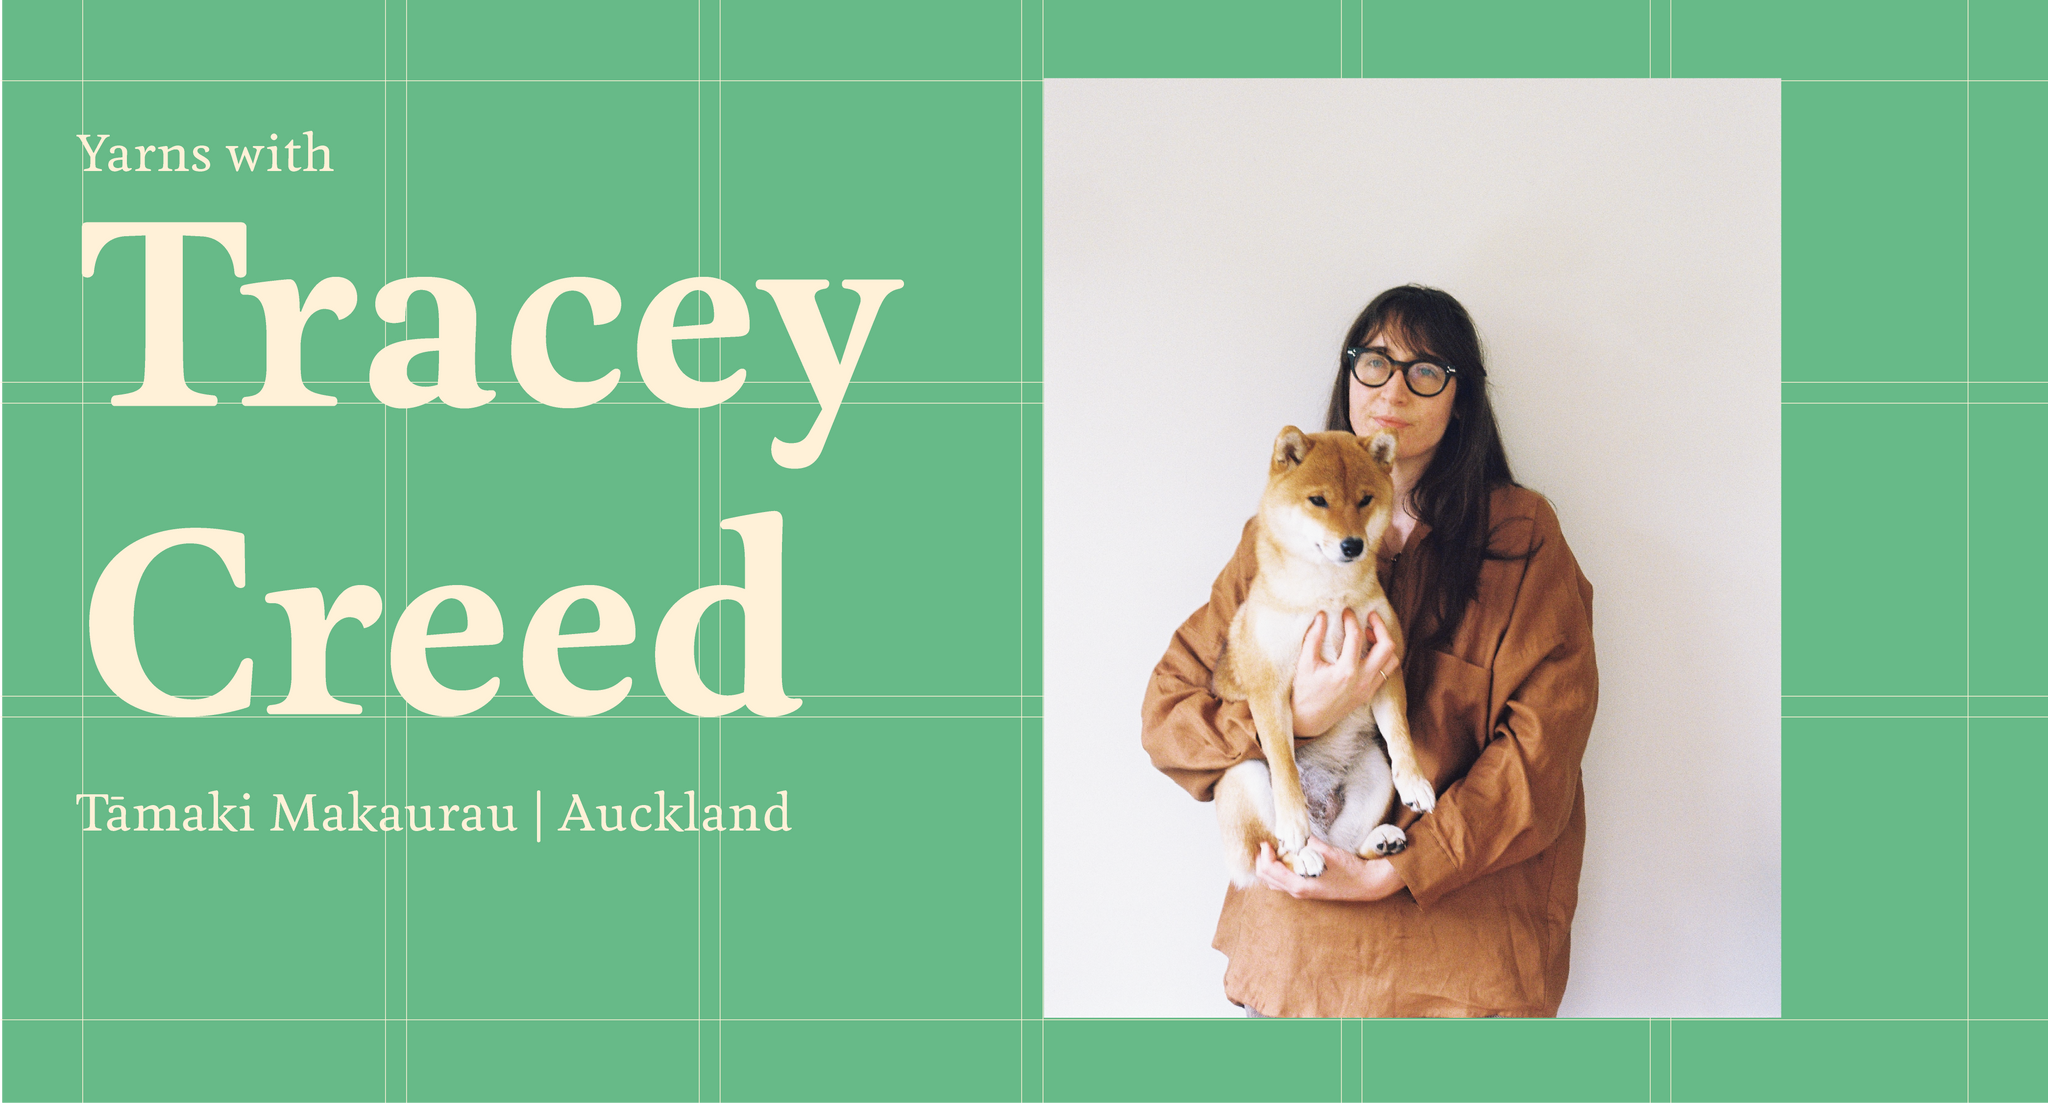 Graphic and photograph of Photographer Tracey Creed holding her small pet dog. She looks direct to camera with glasses and long brown hair.